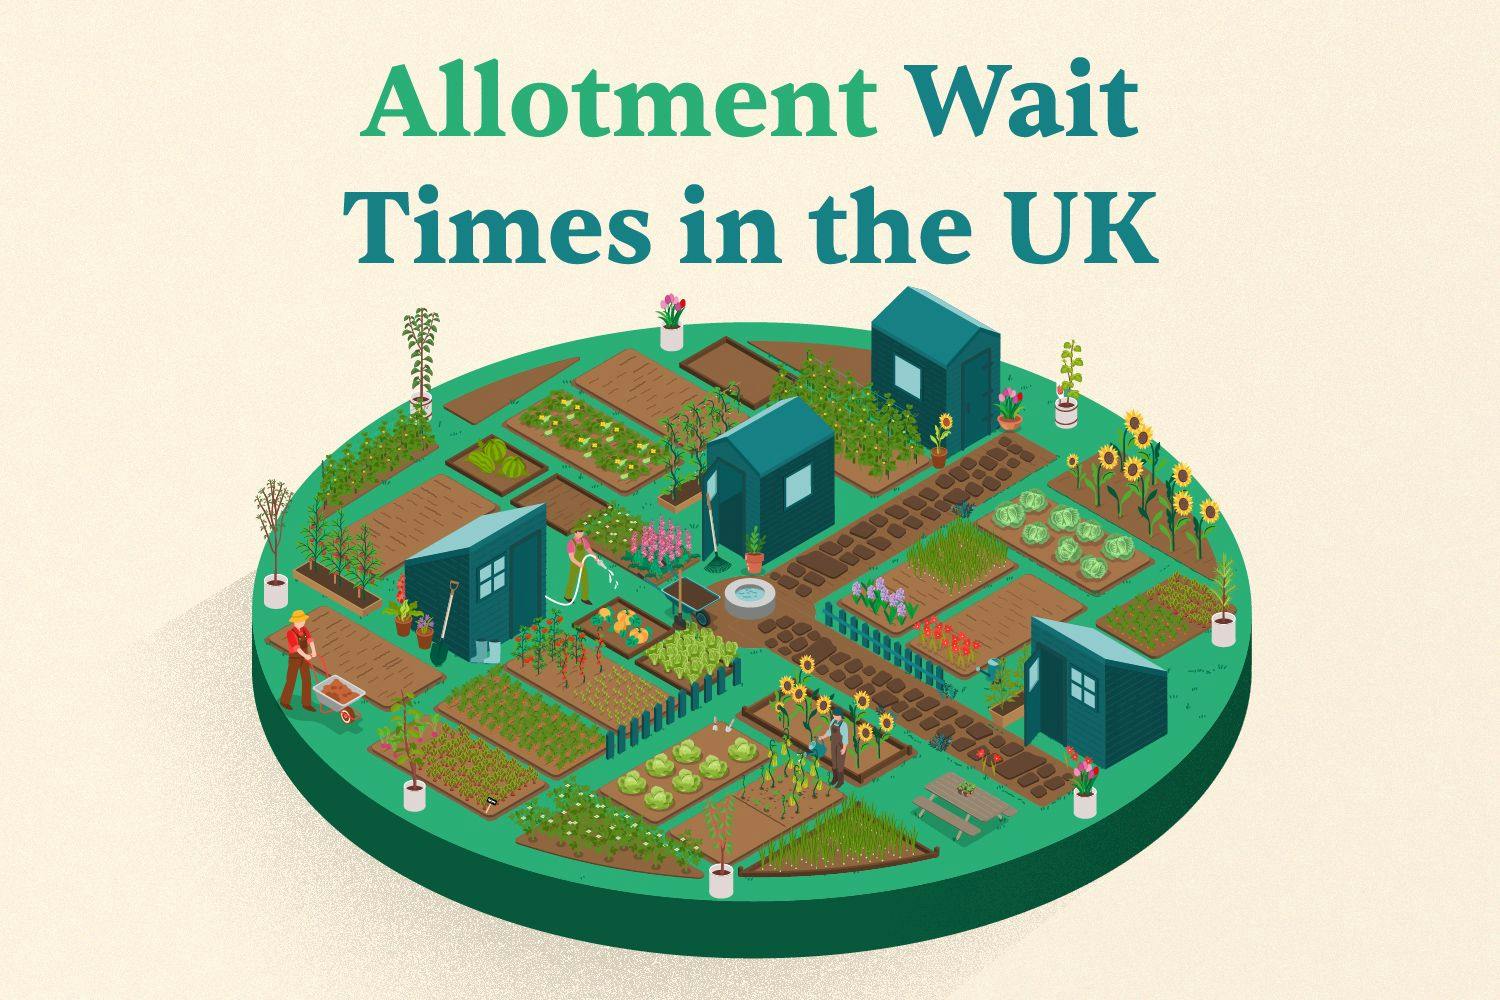 allotment waiting times in the UK with a graphic of an allotment in the shape of a clock